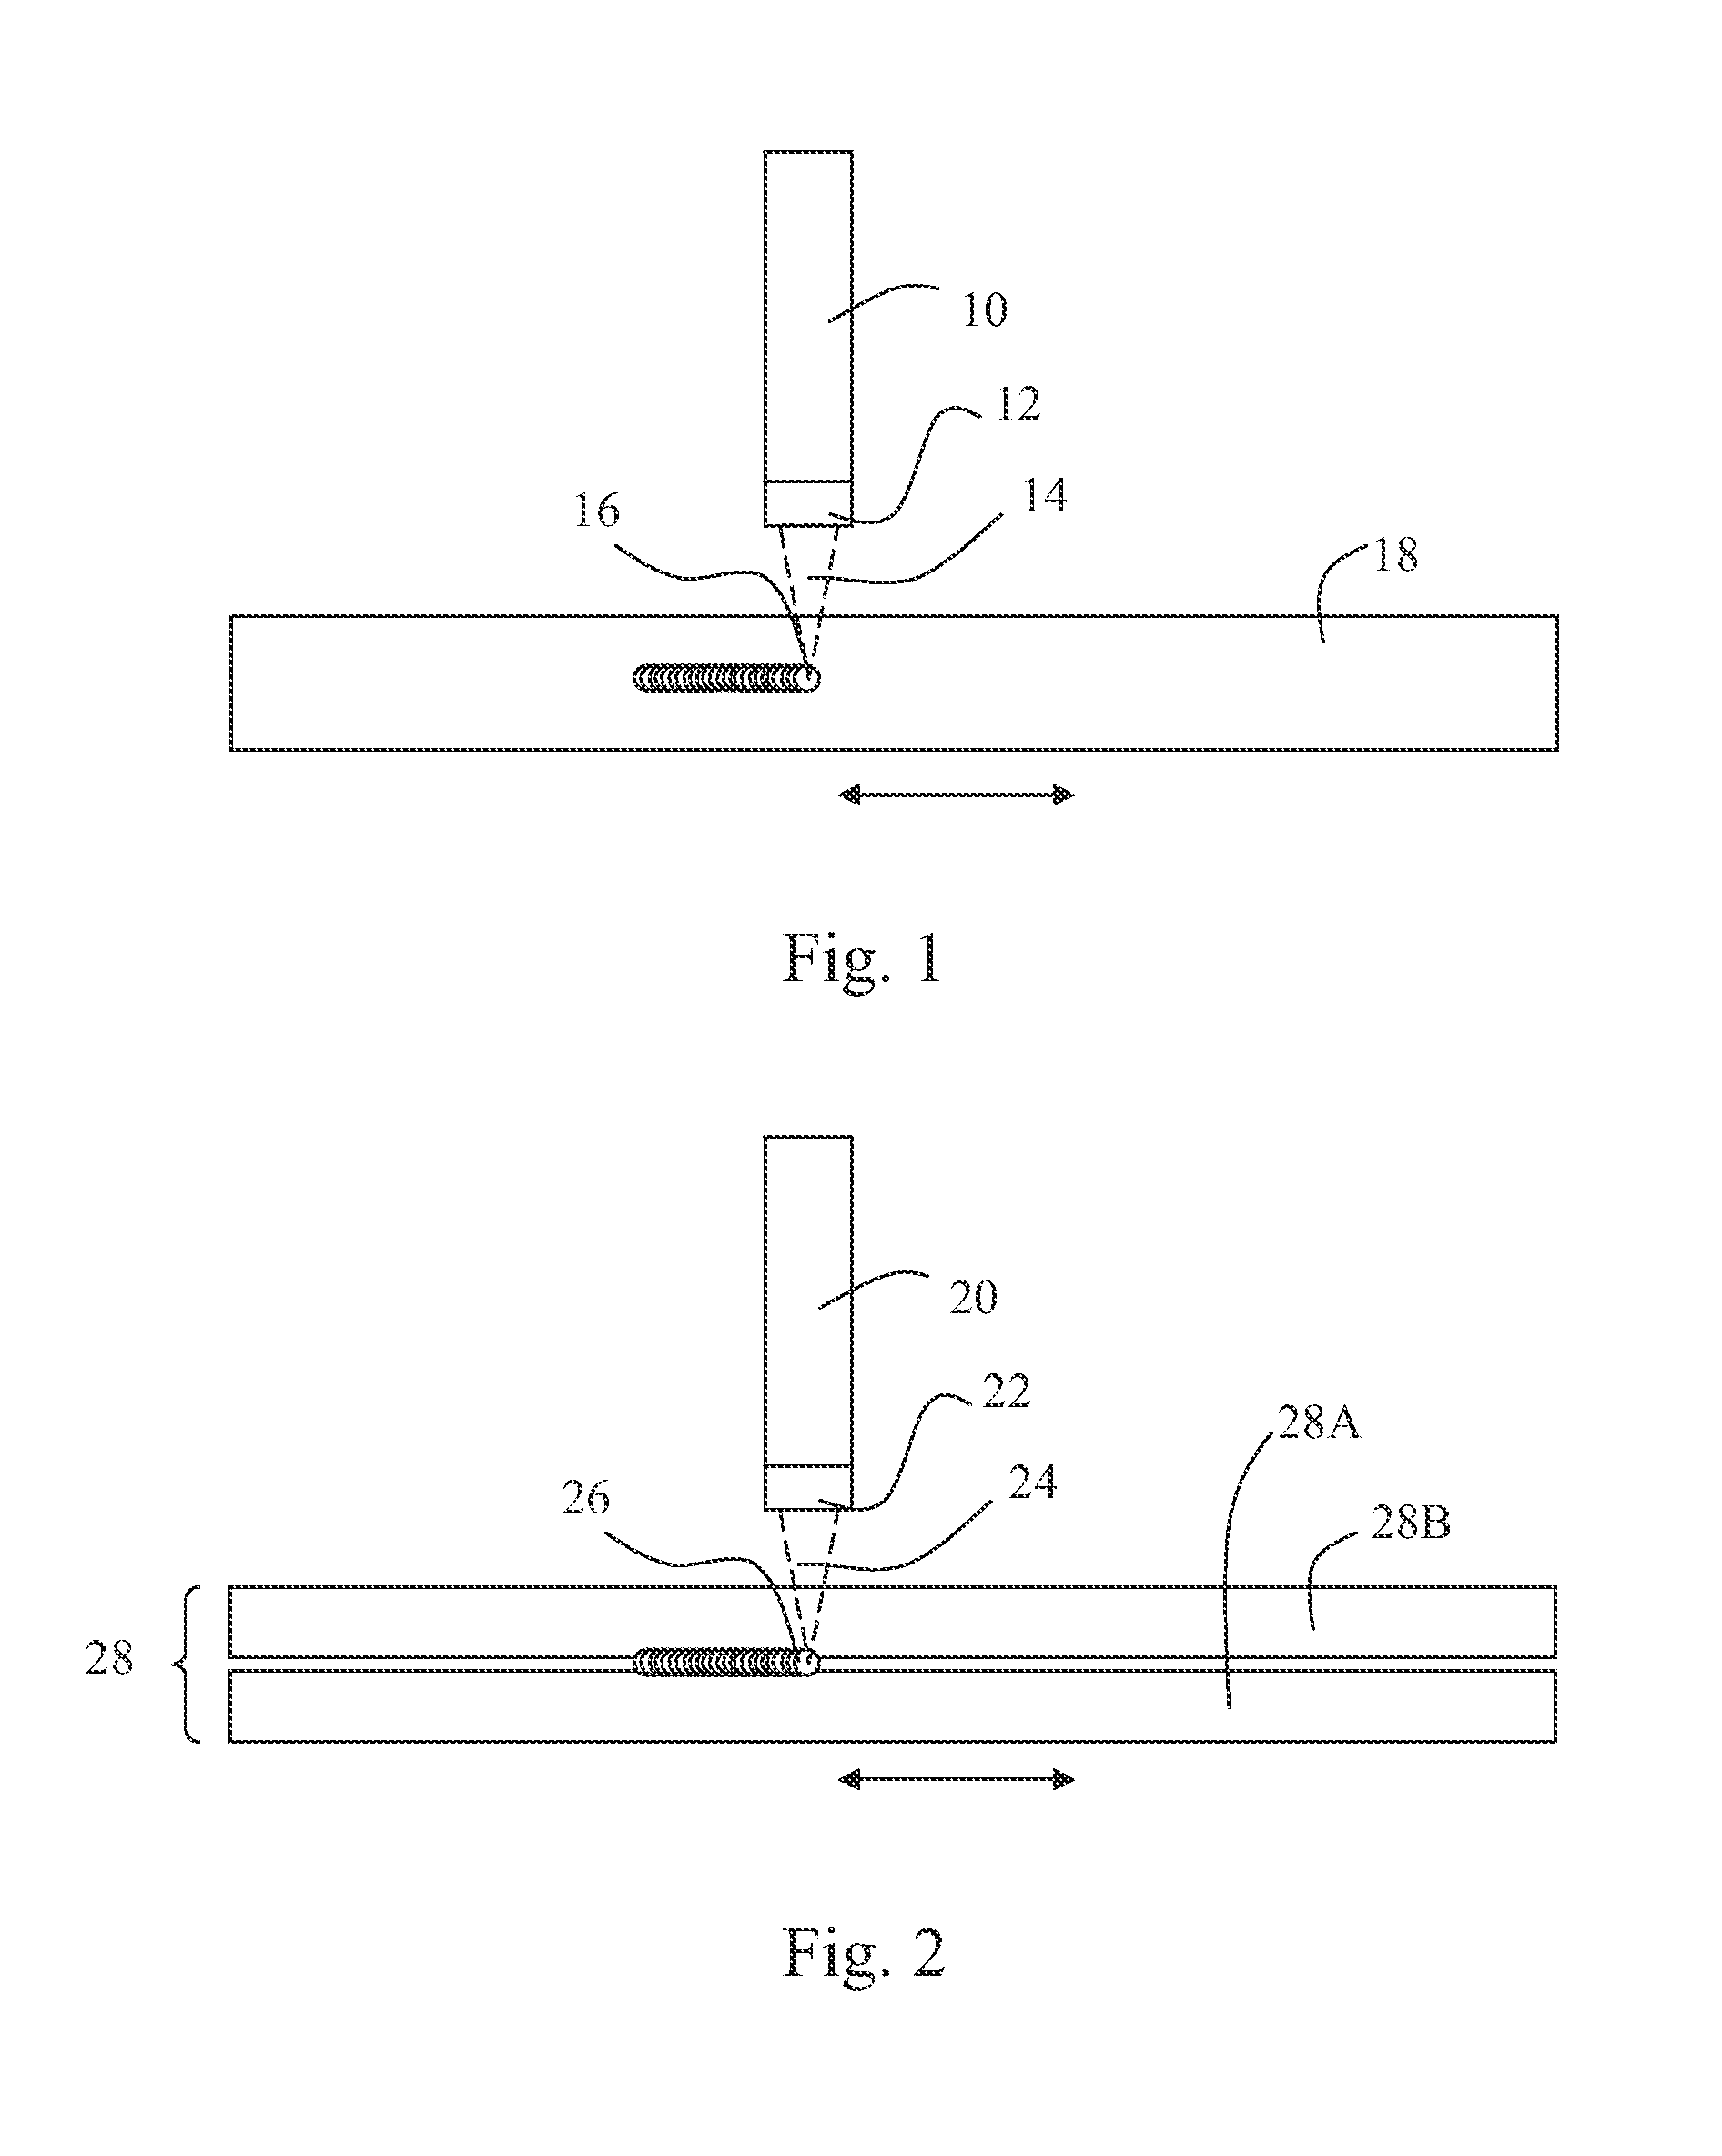 Method and apparatus for processing substrates using a laser